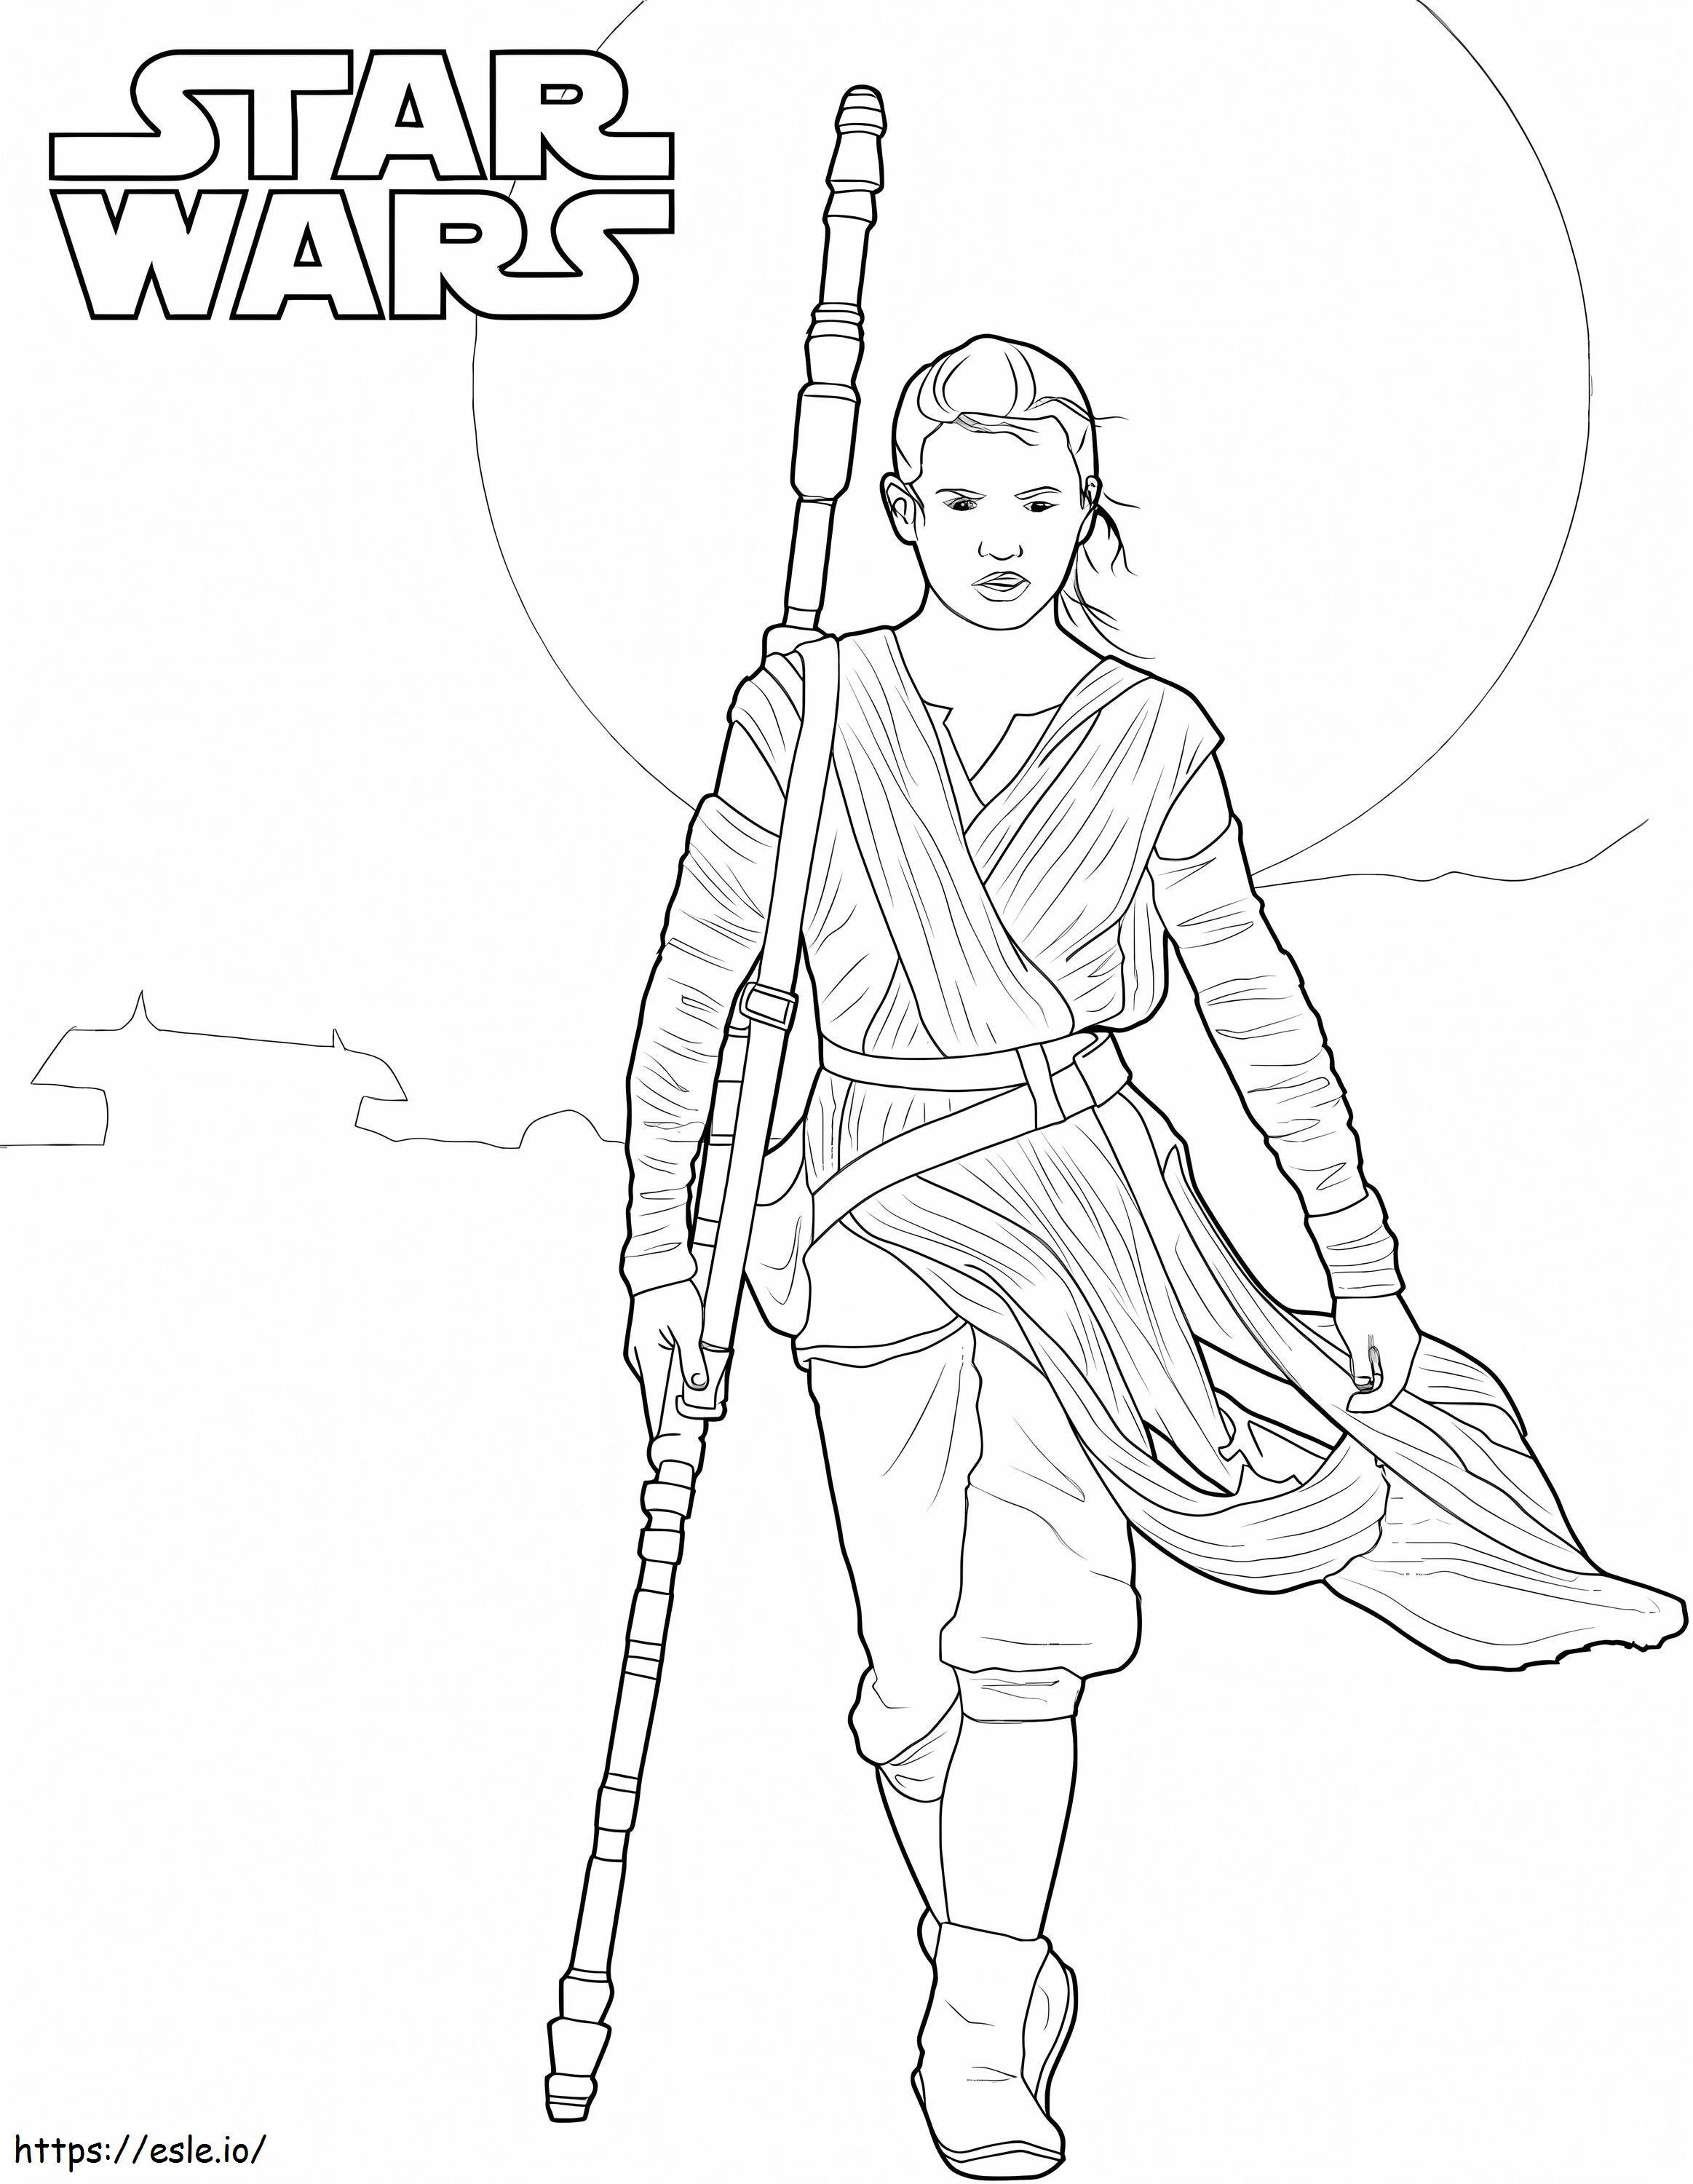 Rey And Star Wars coloring page